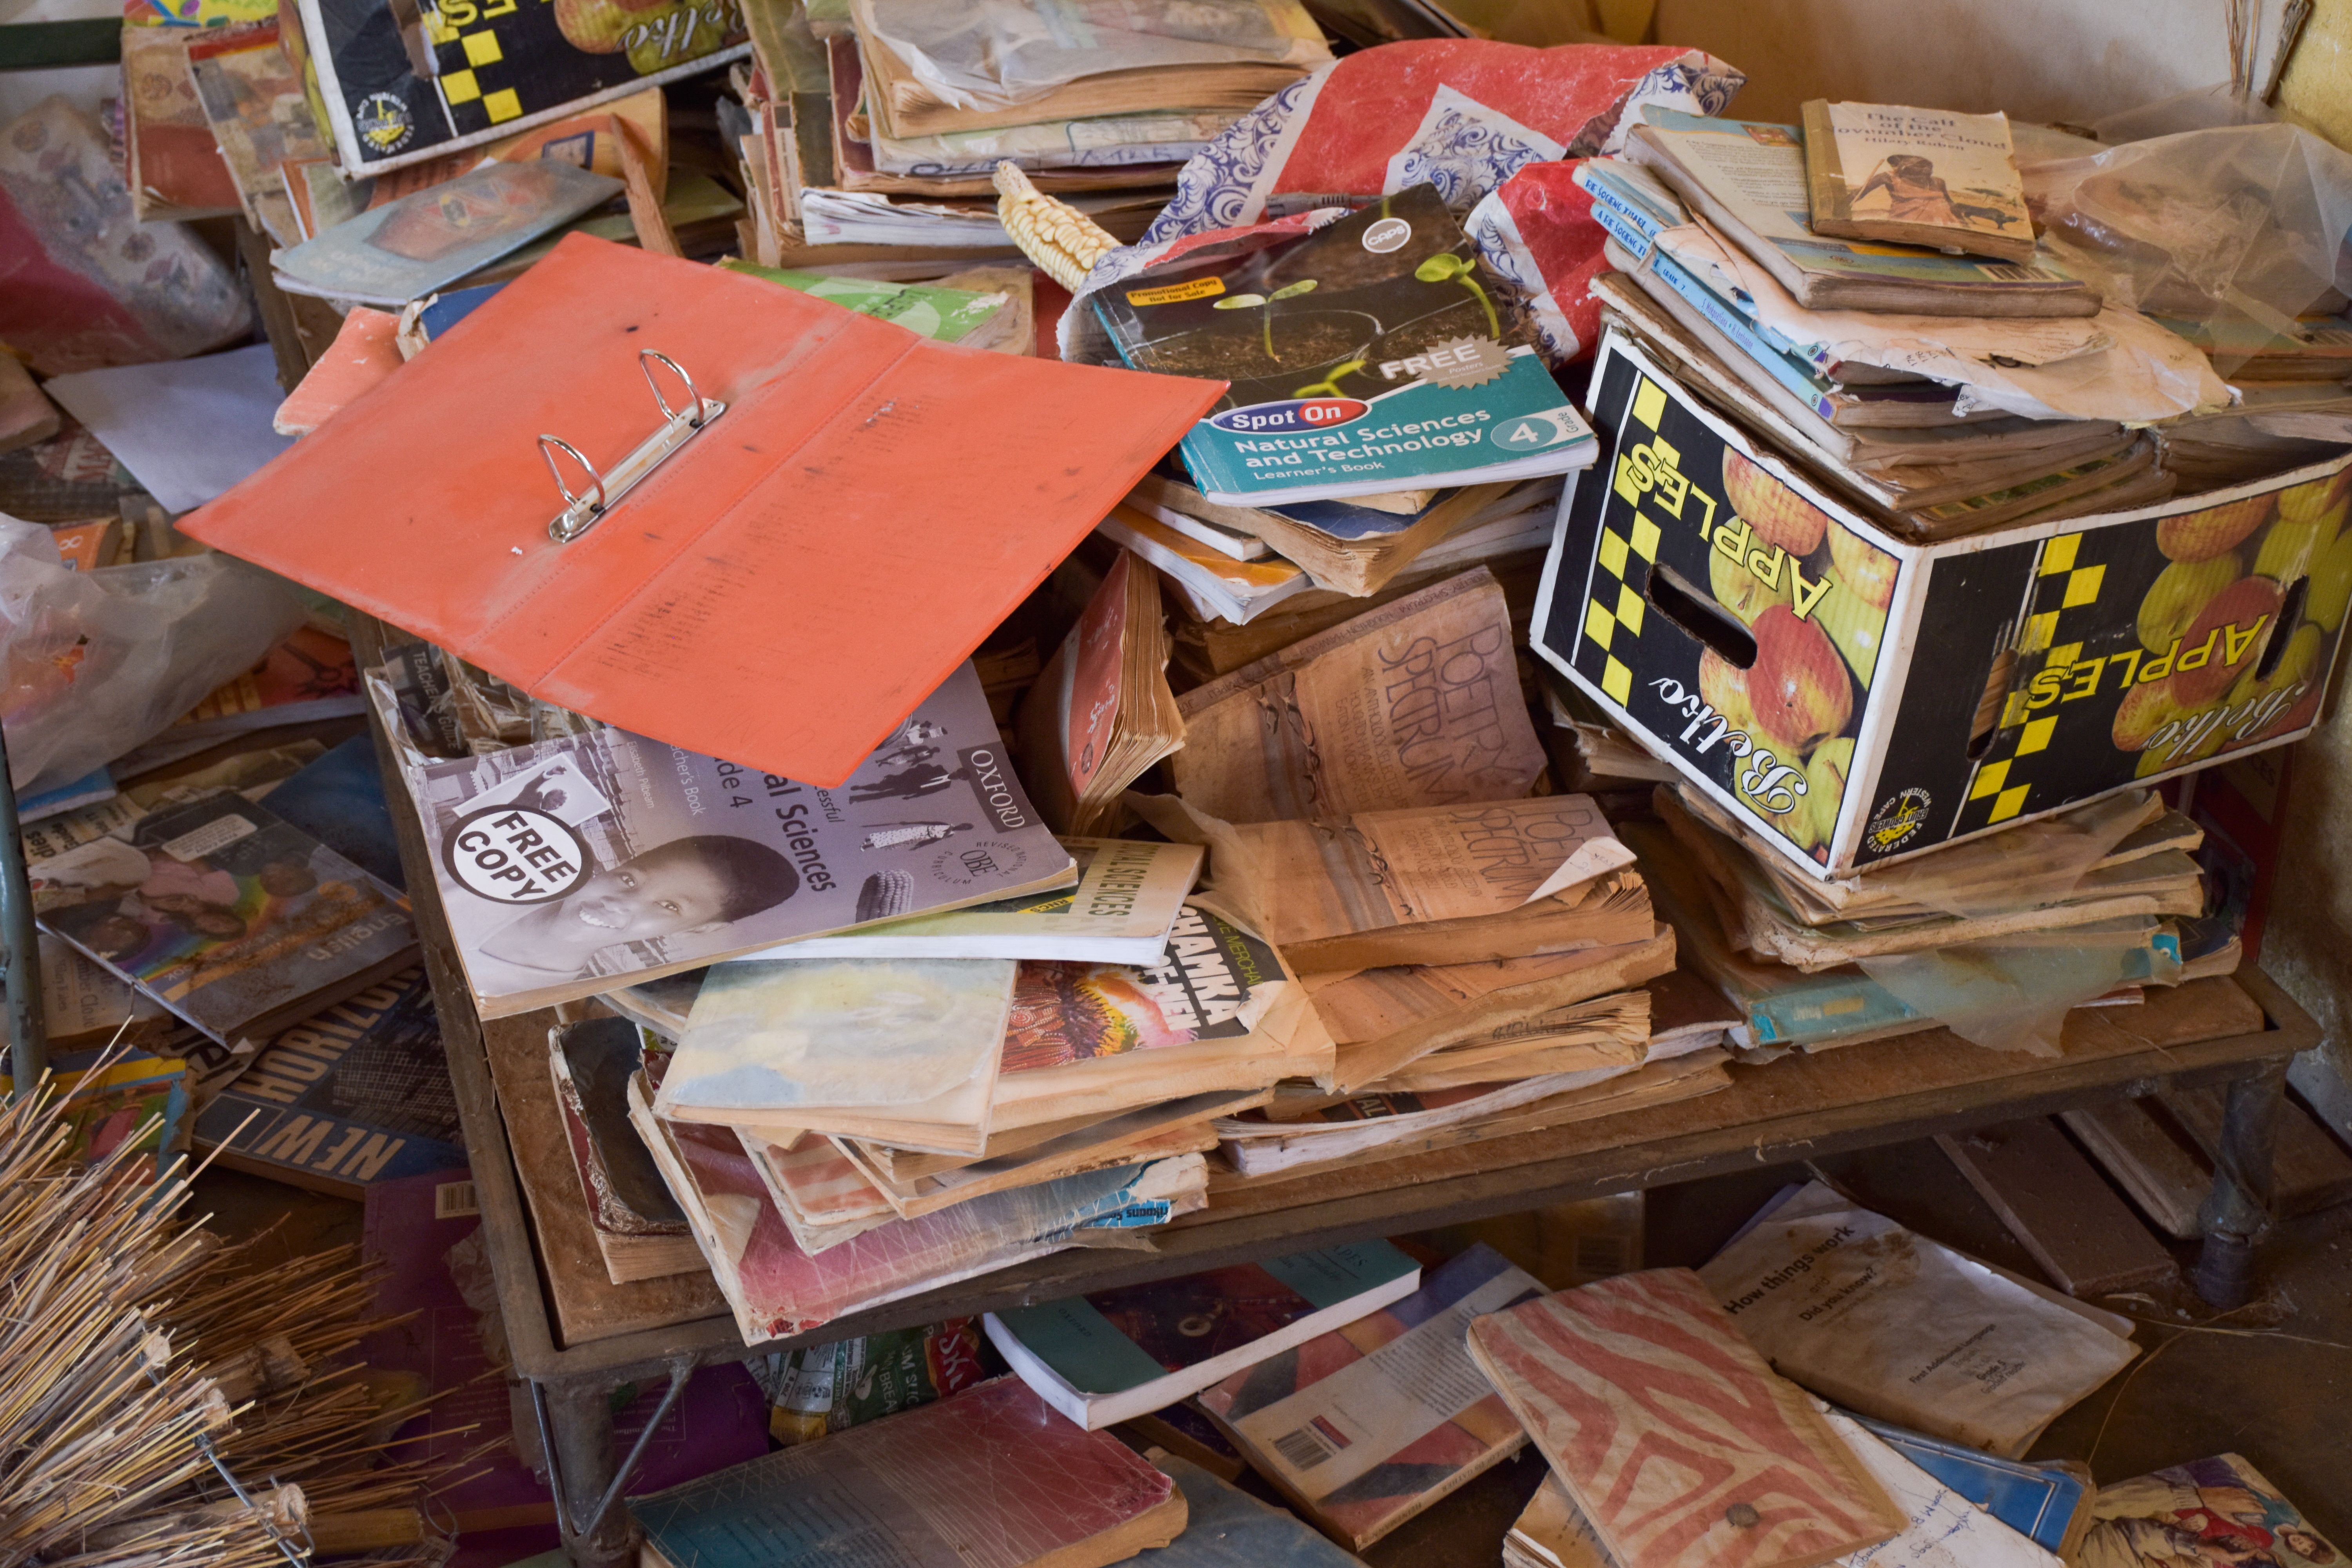 A pile of old textbooks and novels that are no longer used at Utjane. Utjane, like many rural schools, lacks a usable library. Image by Adam Yates. South Africa, 2018.